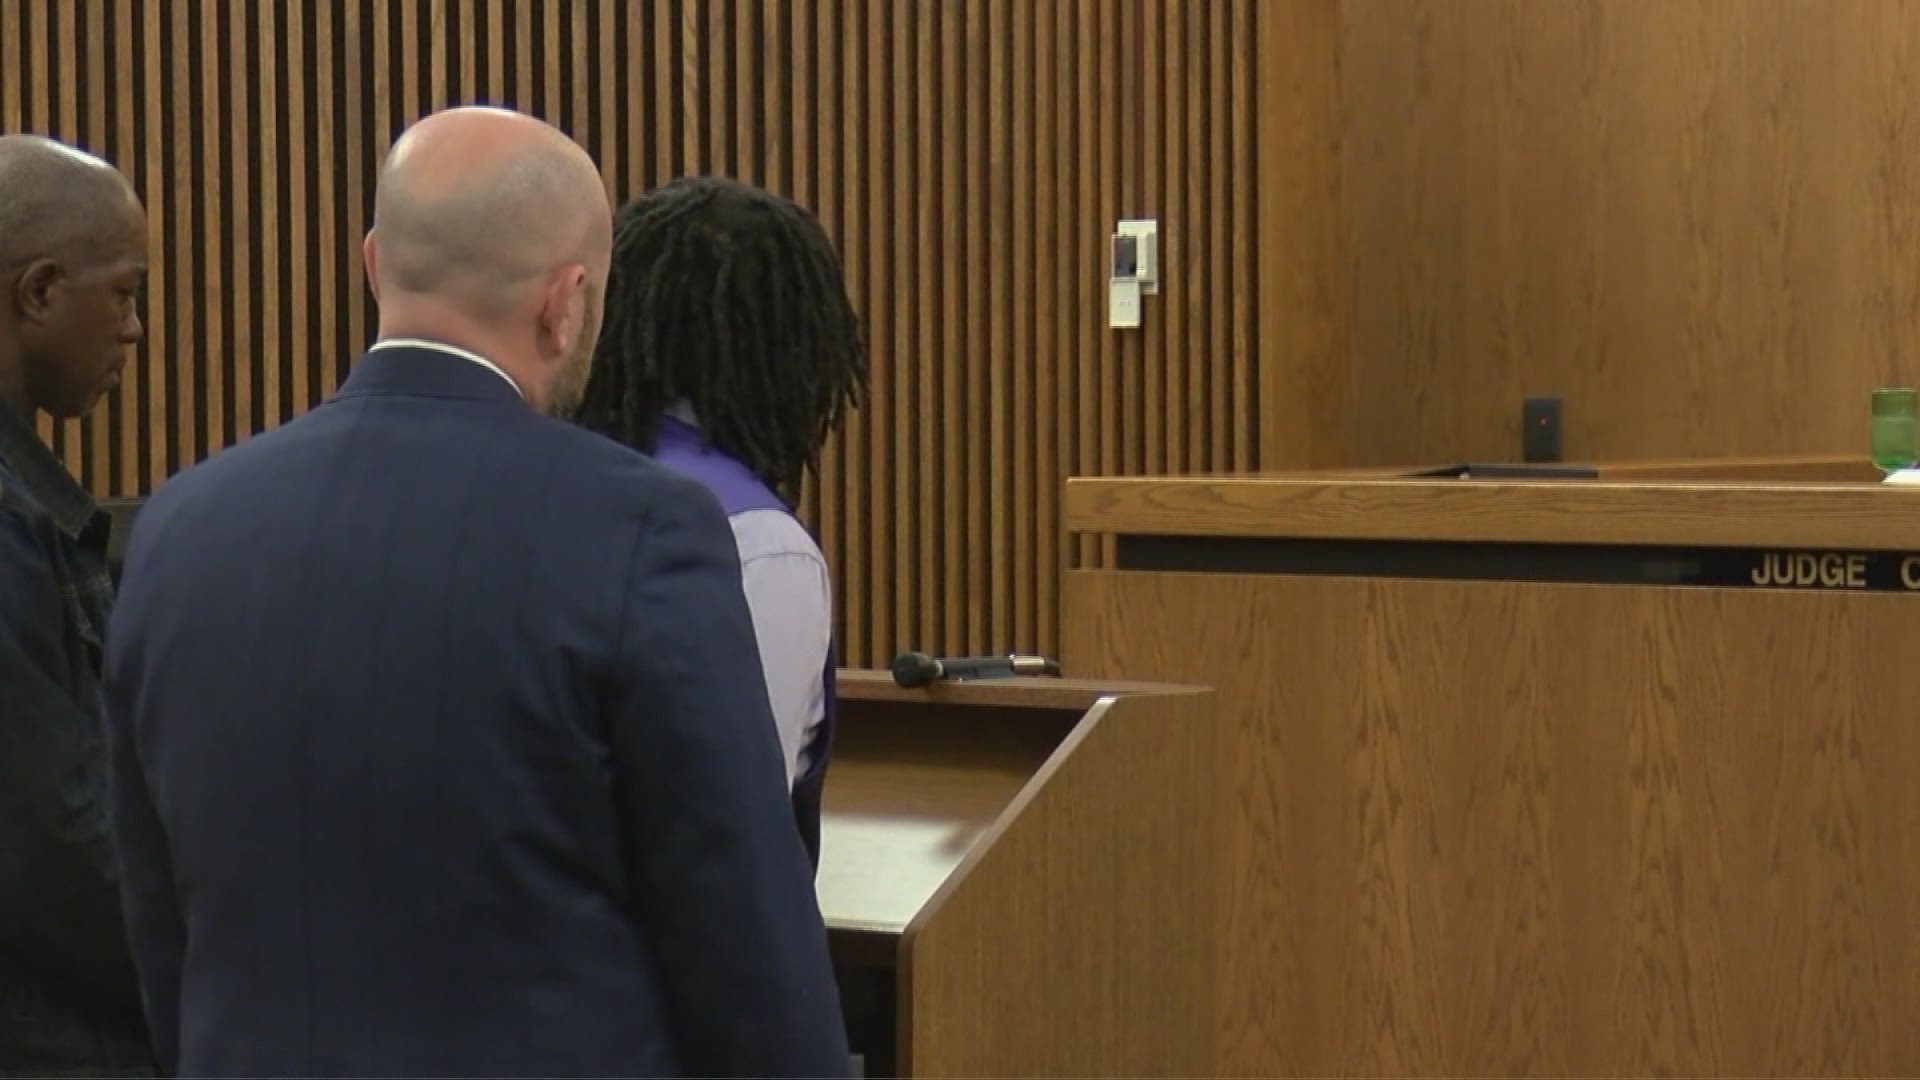 The father to 14-year-old Alianna DeFreeze, who was tortured and killed by Christopher Whitaker, gave an emotional statement before Whitaker was sentenced to death.